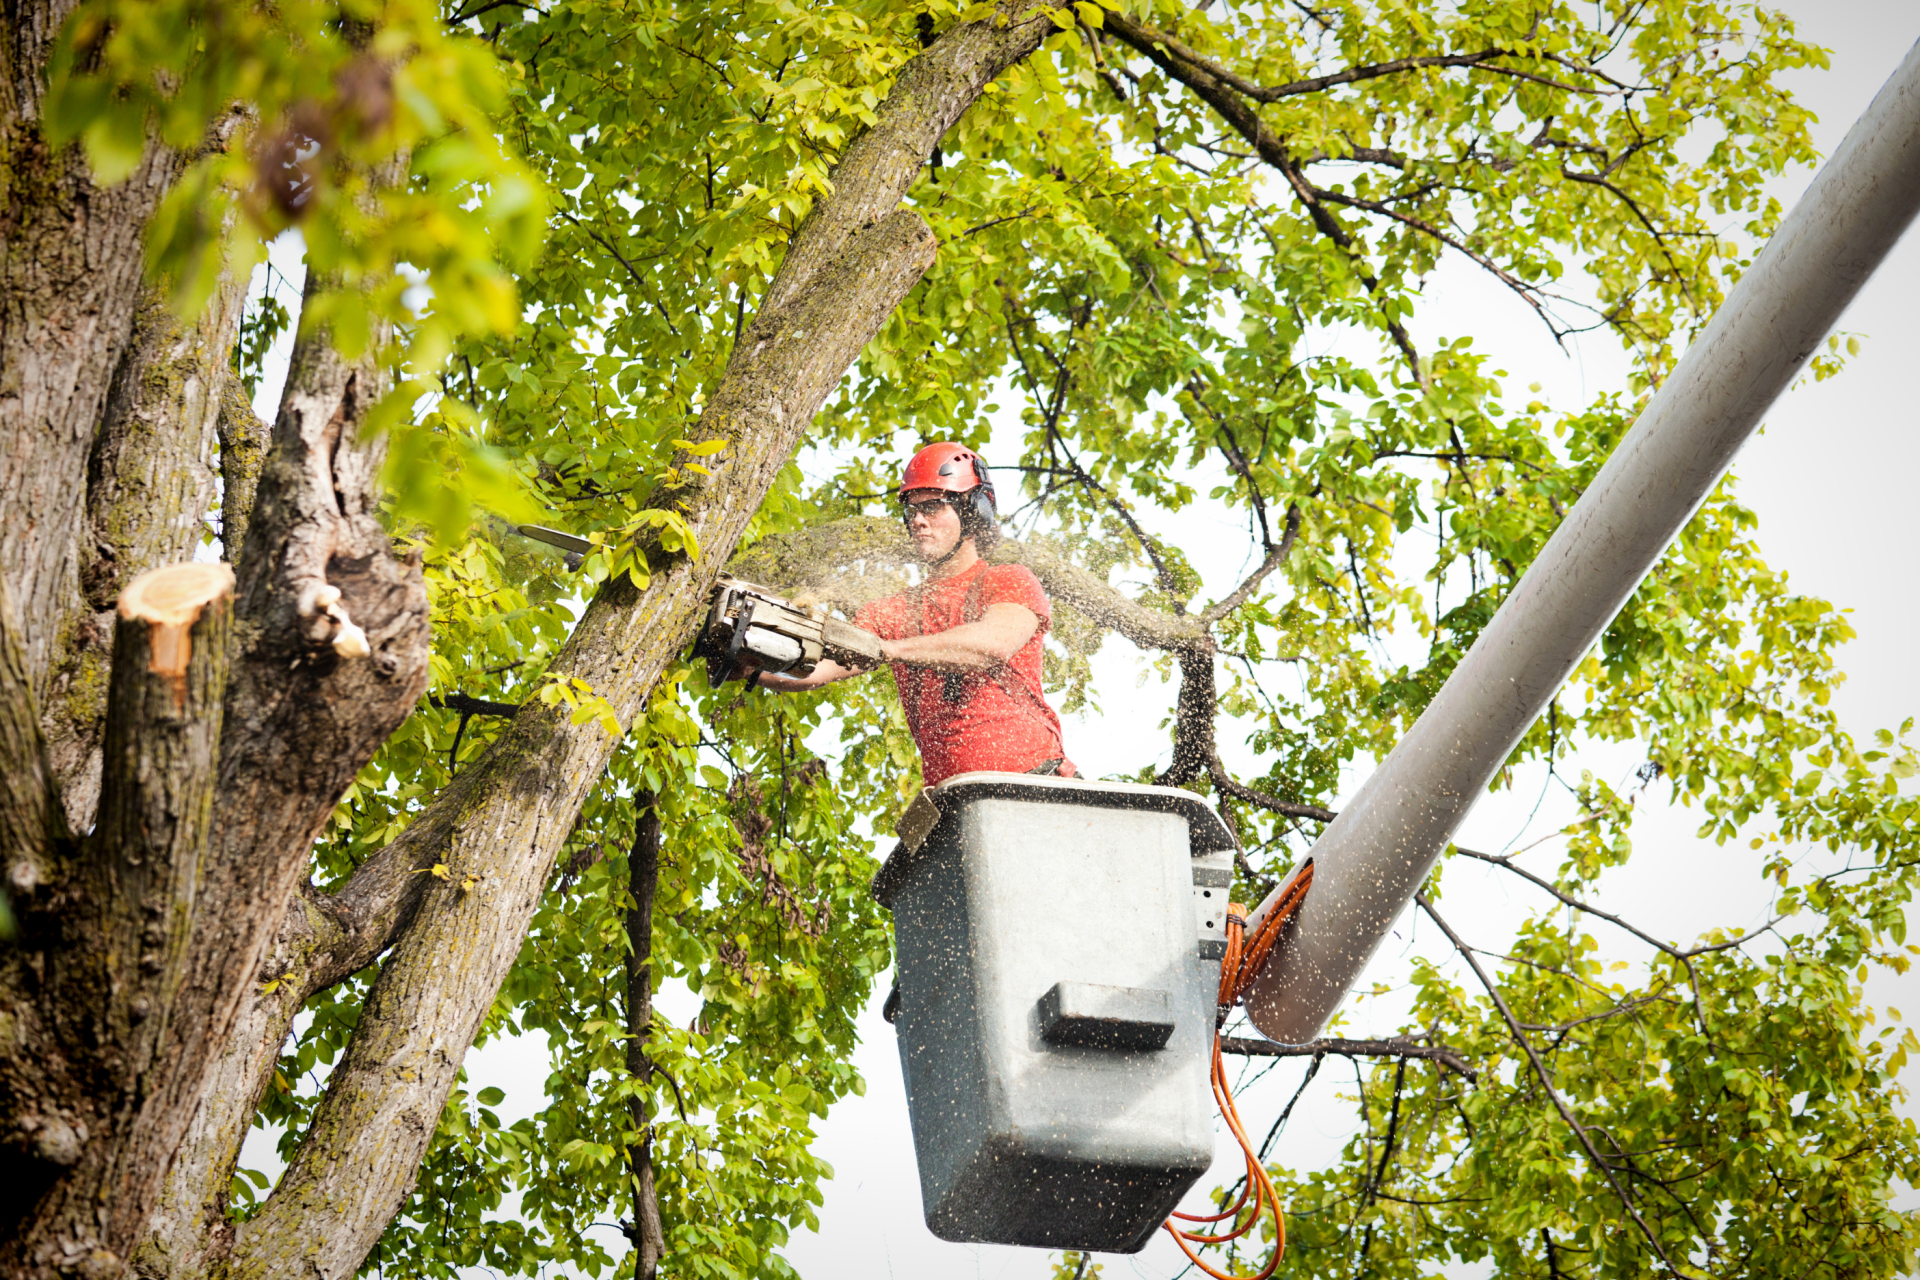 Lighthouse point arborist in tree removing limbs for a tree trimming service